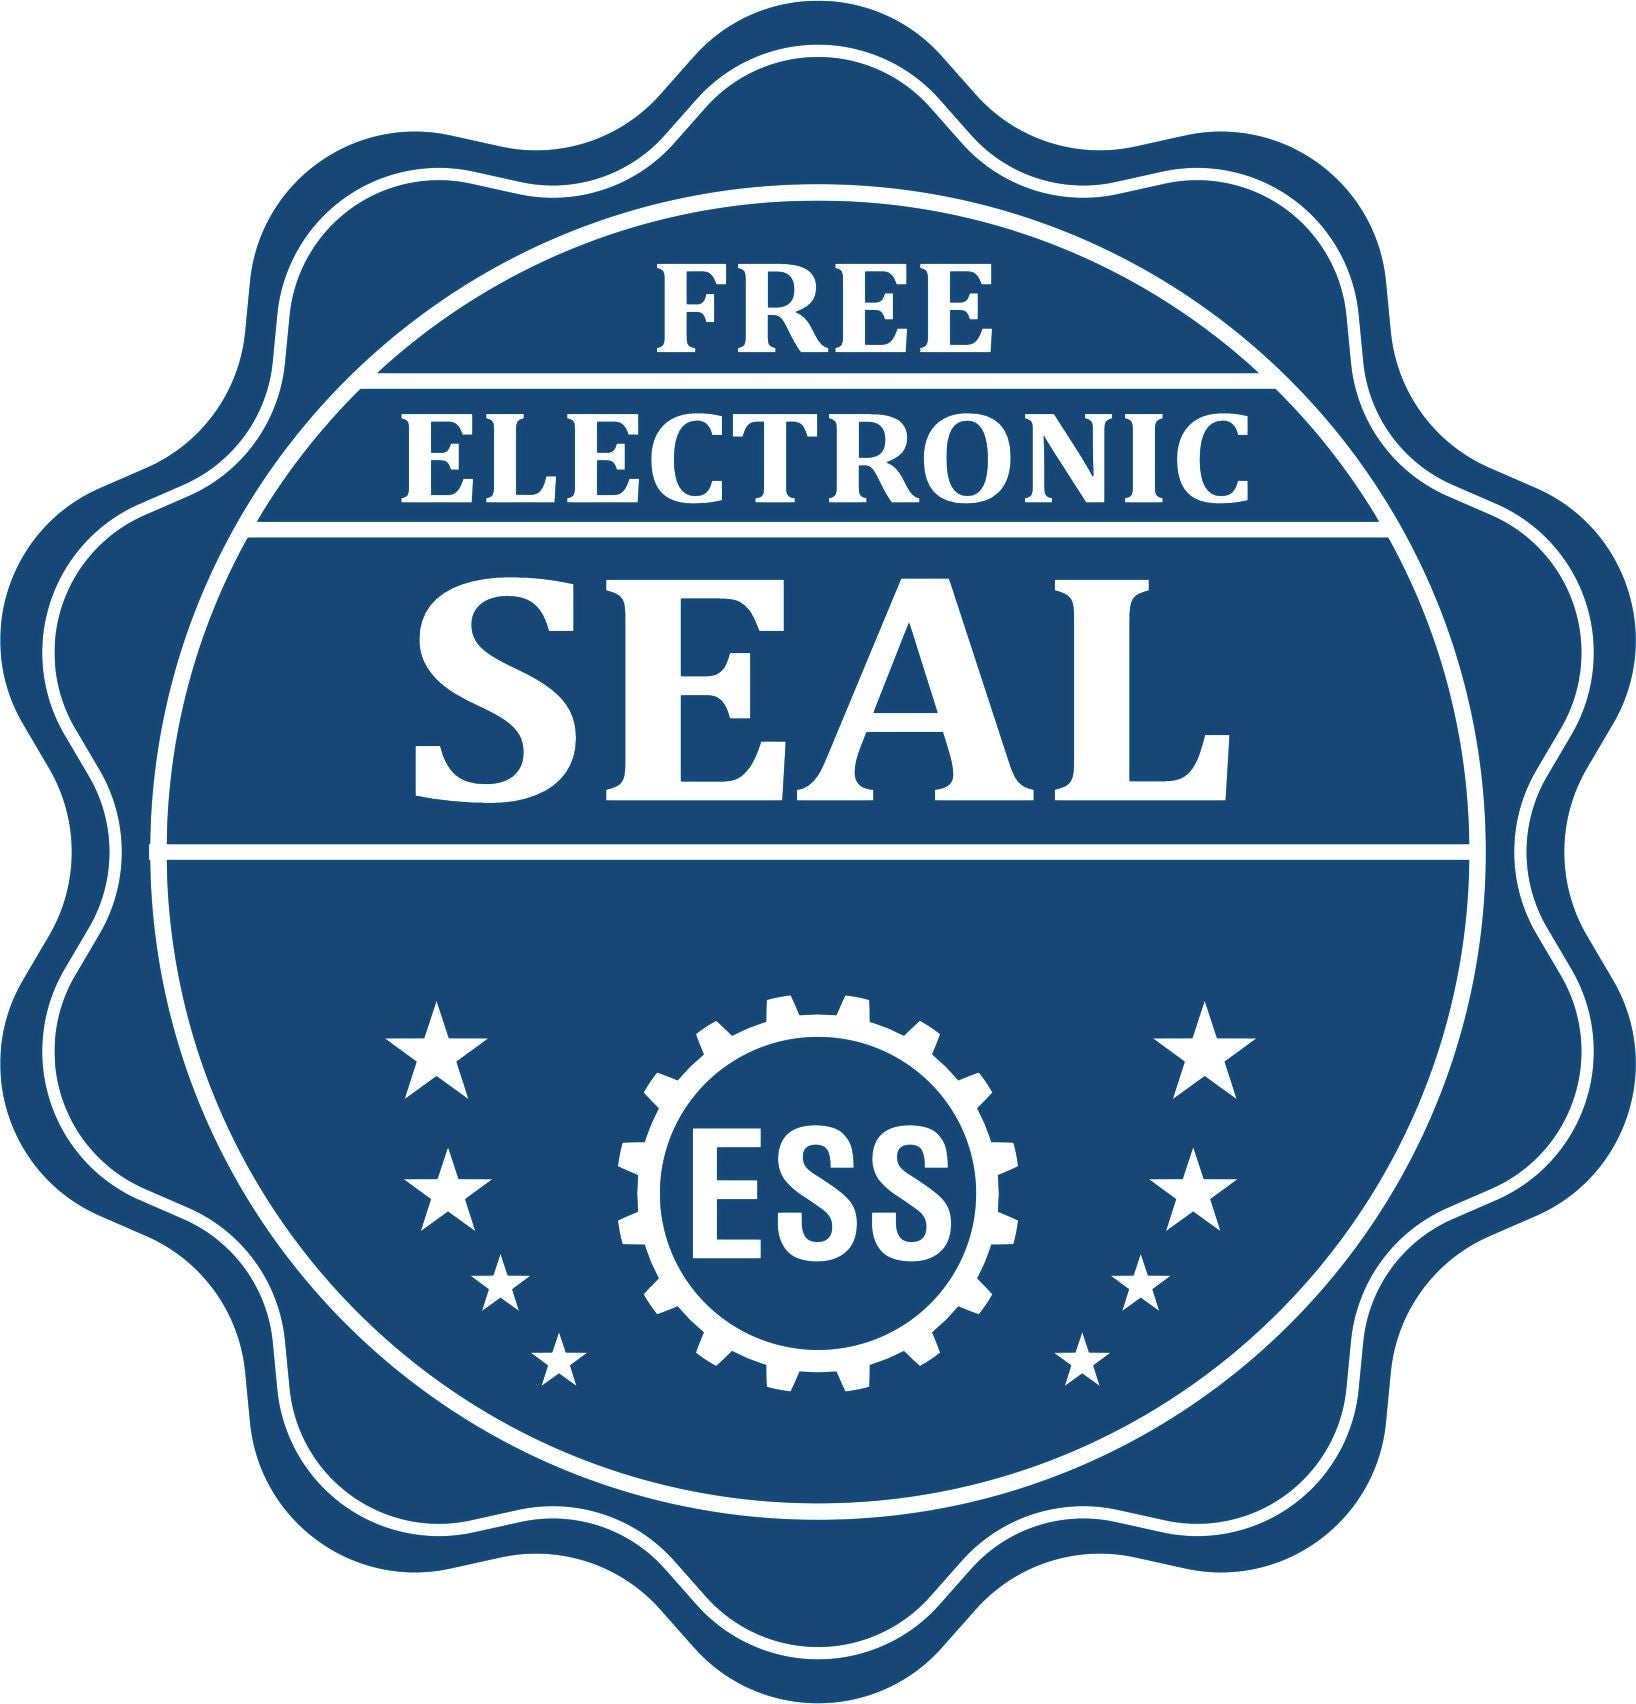 A badge showing a free electronic seal for the State of Maine Extended Long Reach Engineer Seal with stars and the ESS gear on the emblem.